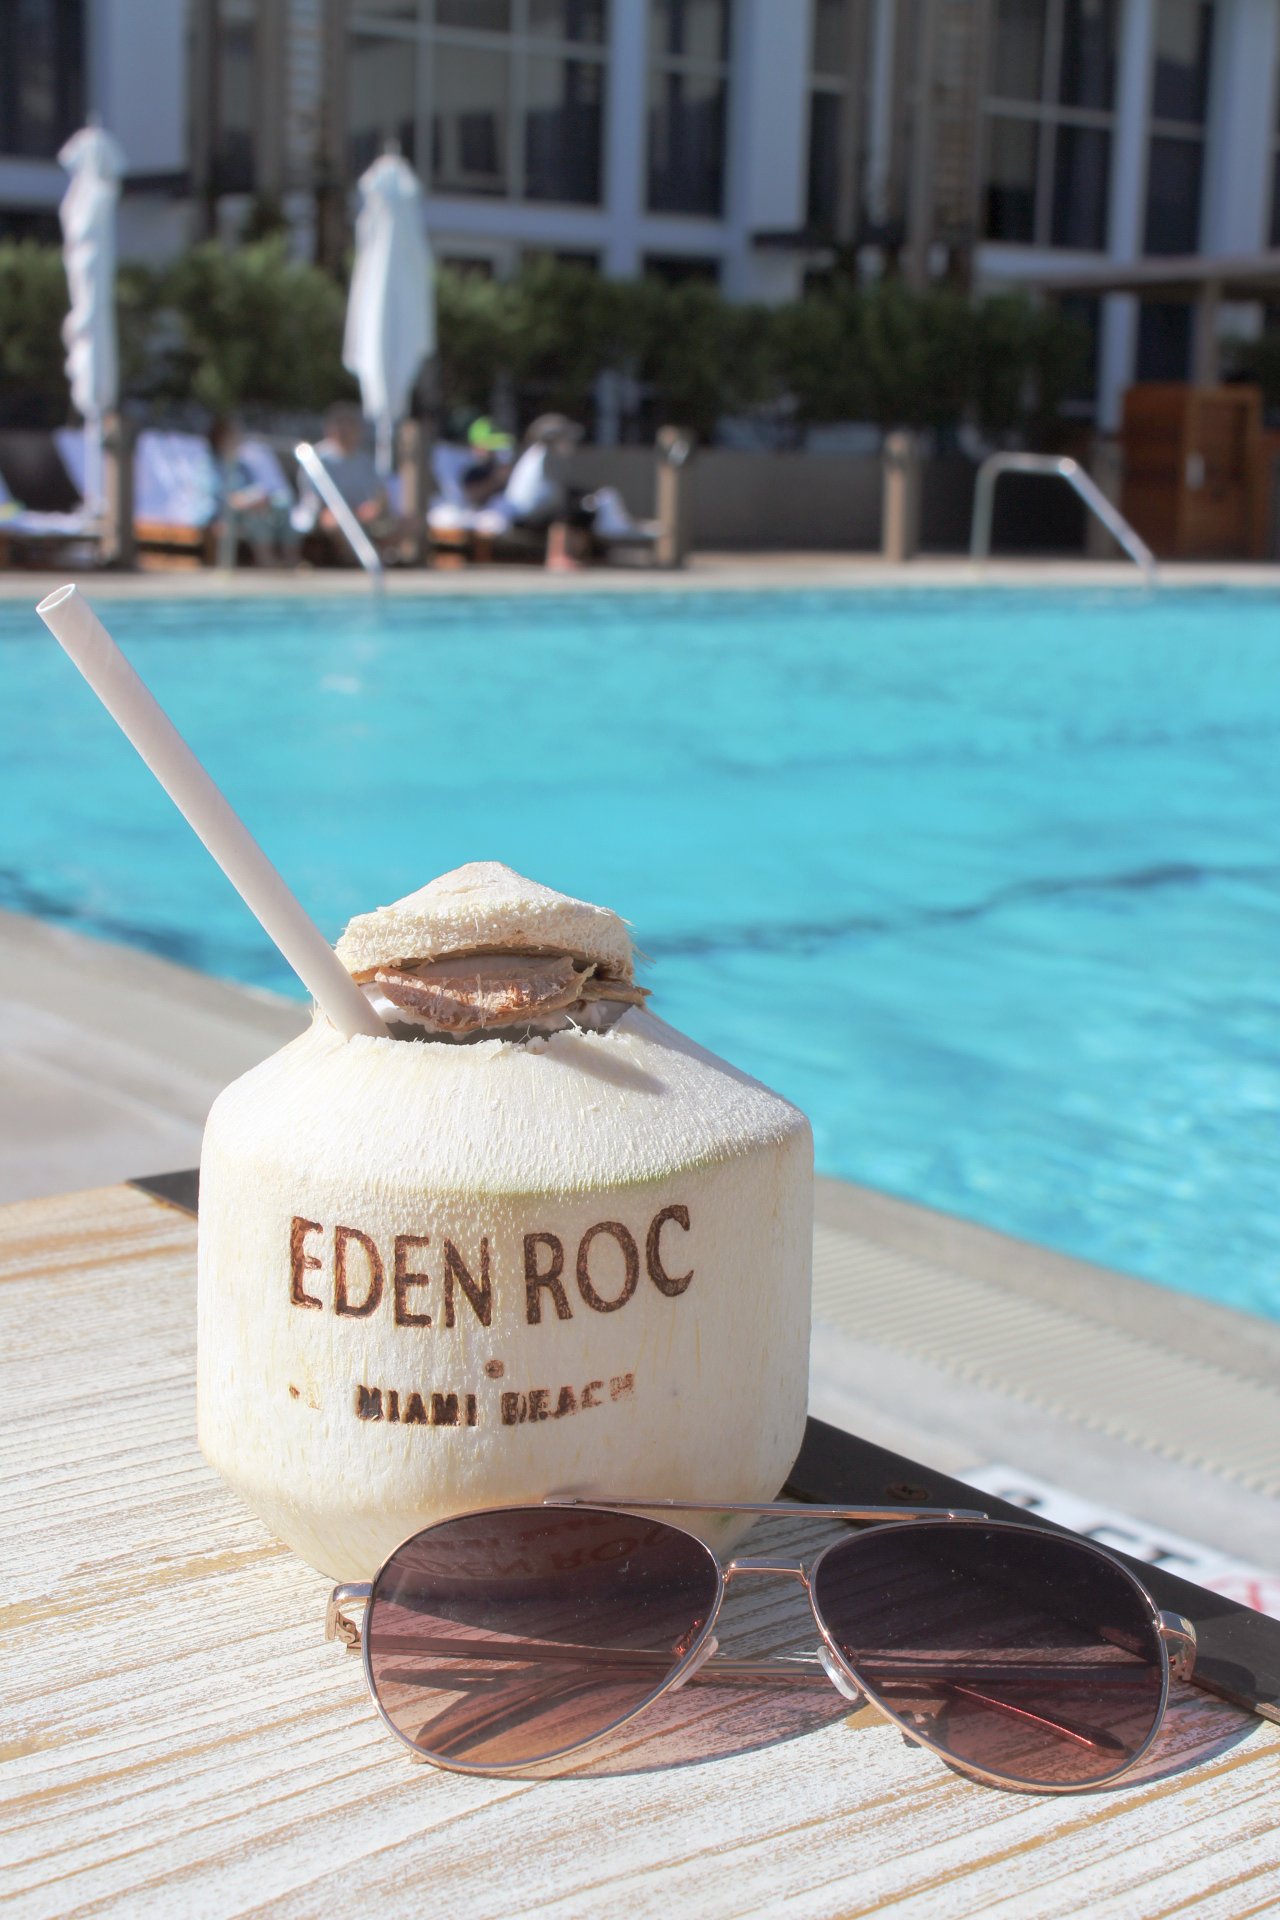 A branded coconut at Eden Roc